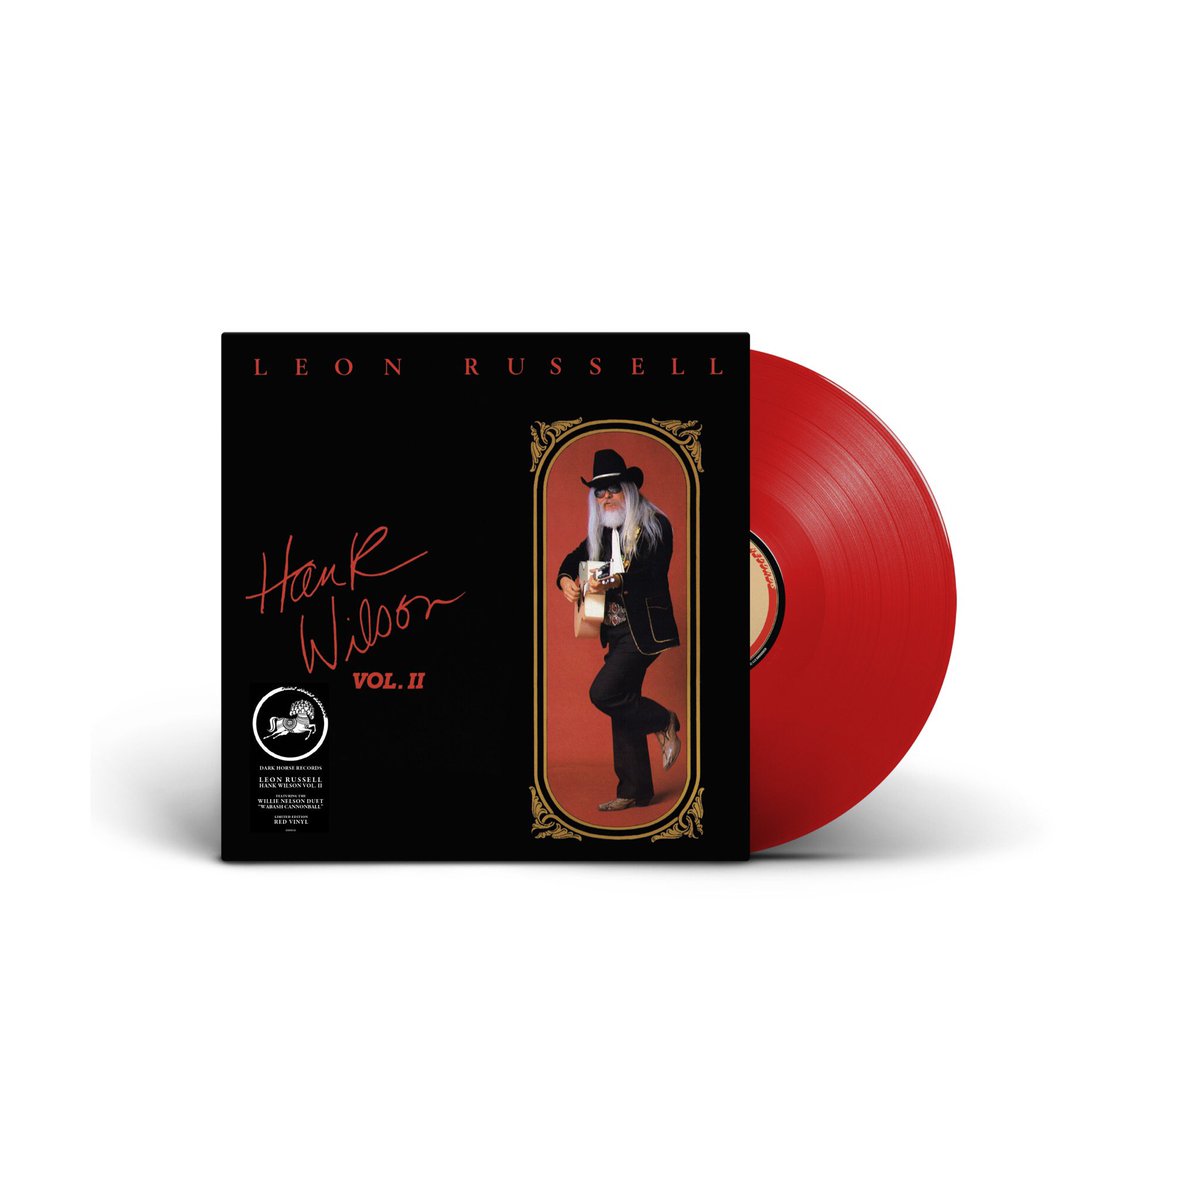 3/3 RSD Black Friday. Pick up @LeonRussell’s HANK WILSON VOL. 2 album, featuring @WillieNelson, on special edition Red Vinyl as part of RSD Black Friday! Find more info and a participating indie record store near you at recordstoreday.com #RSDBlackFriday #RSDBF